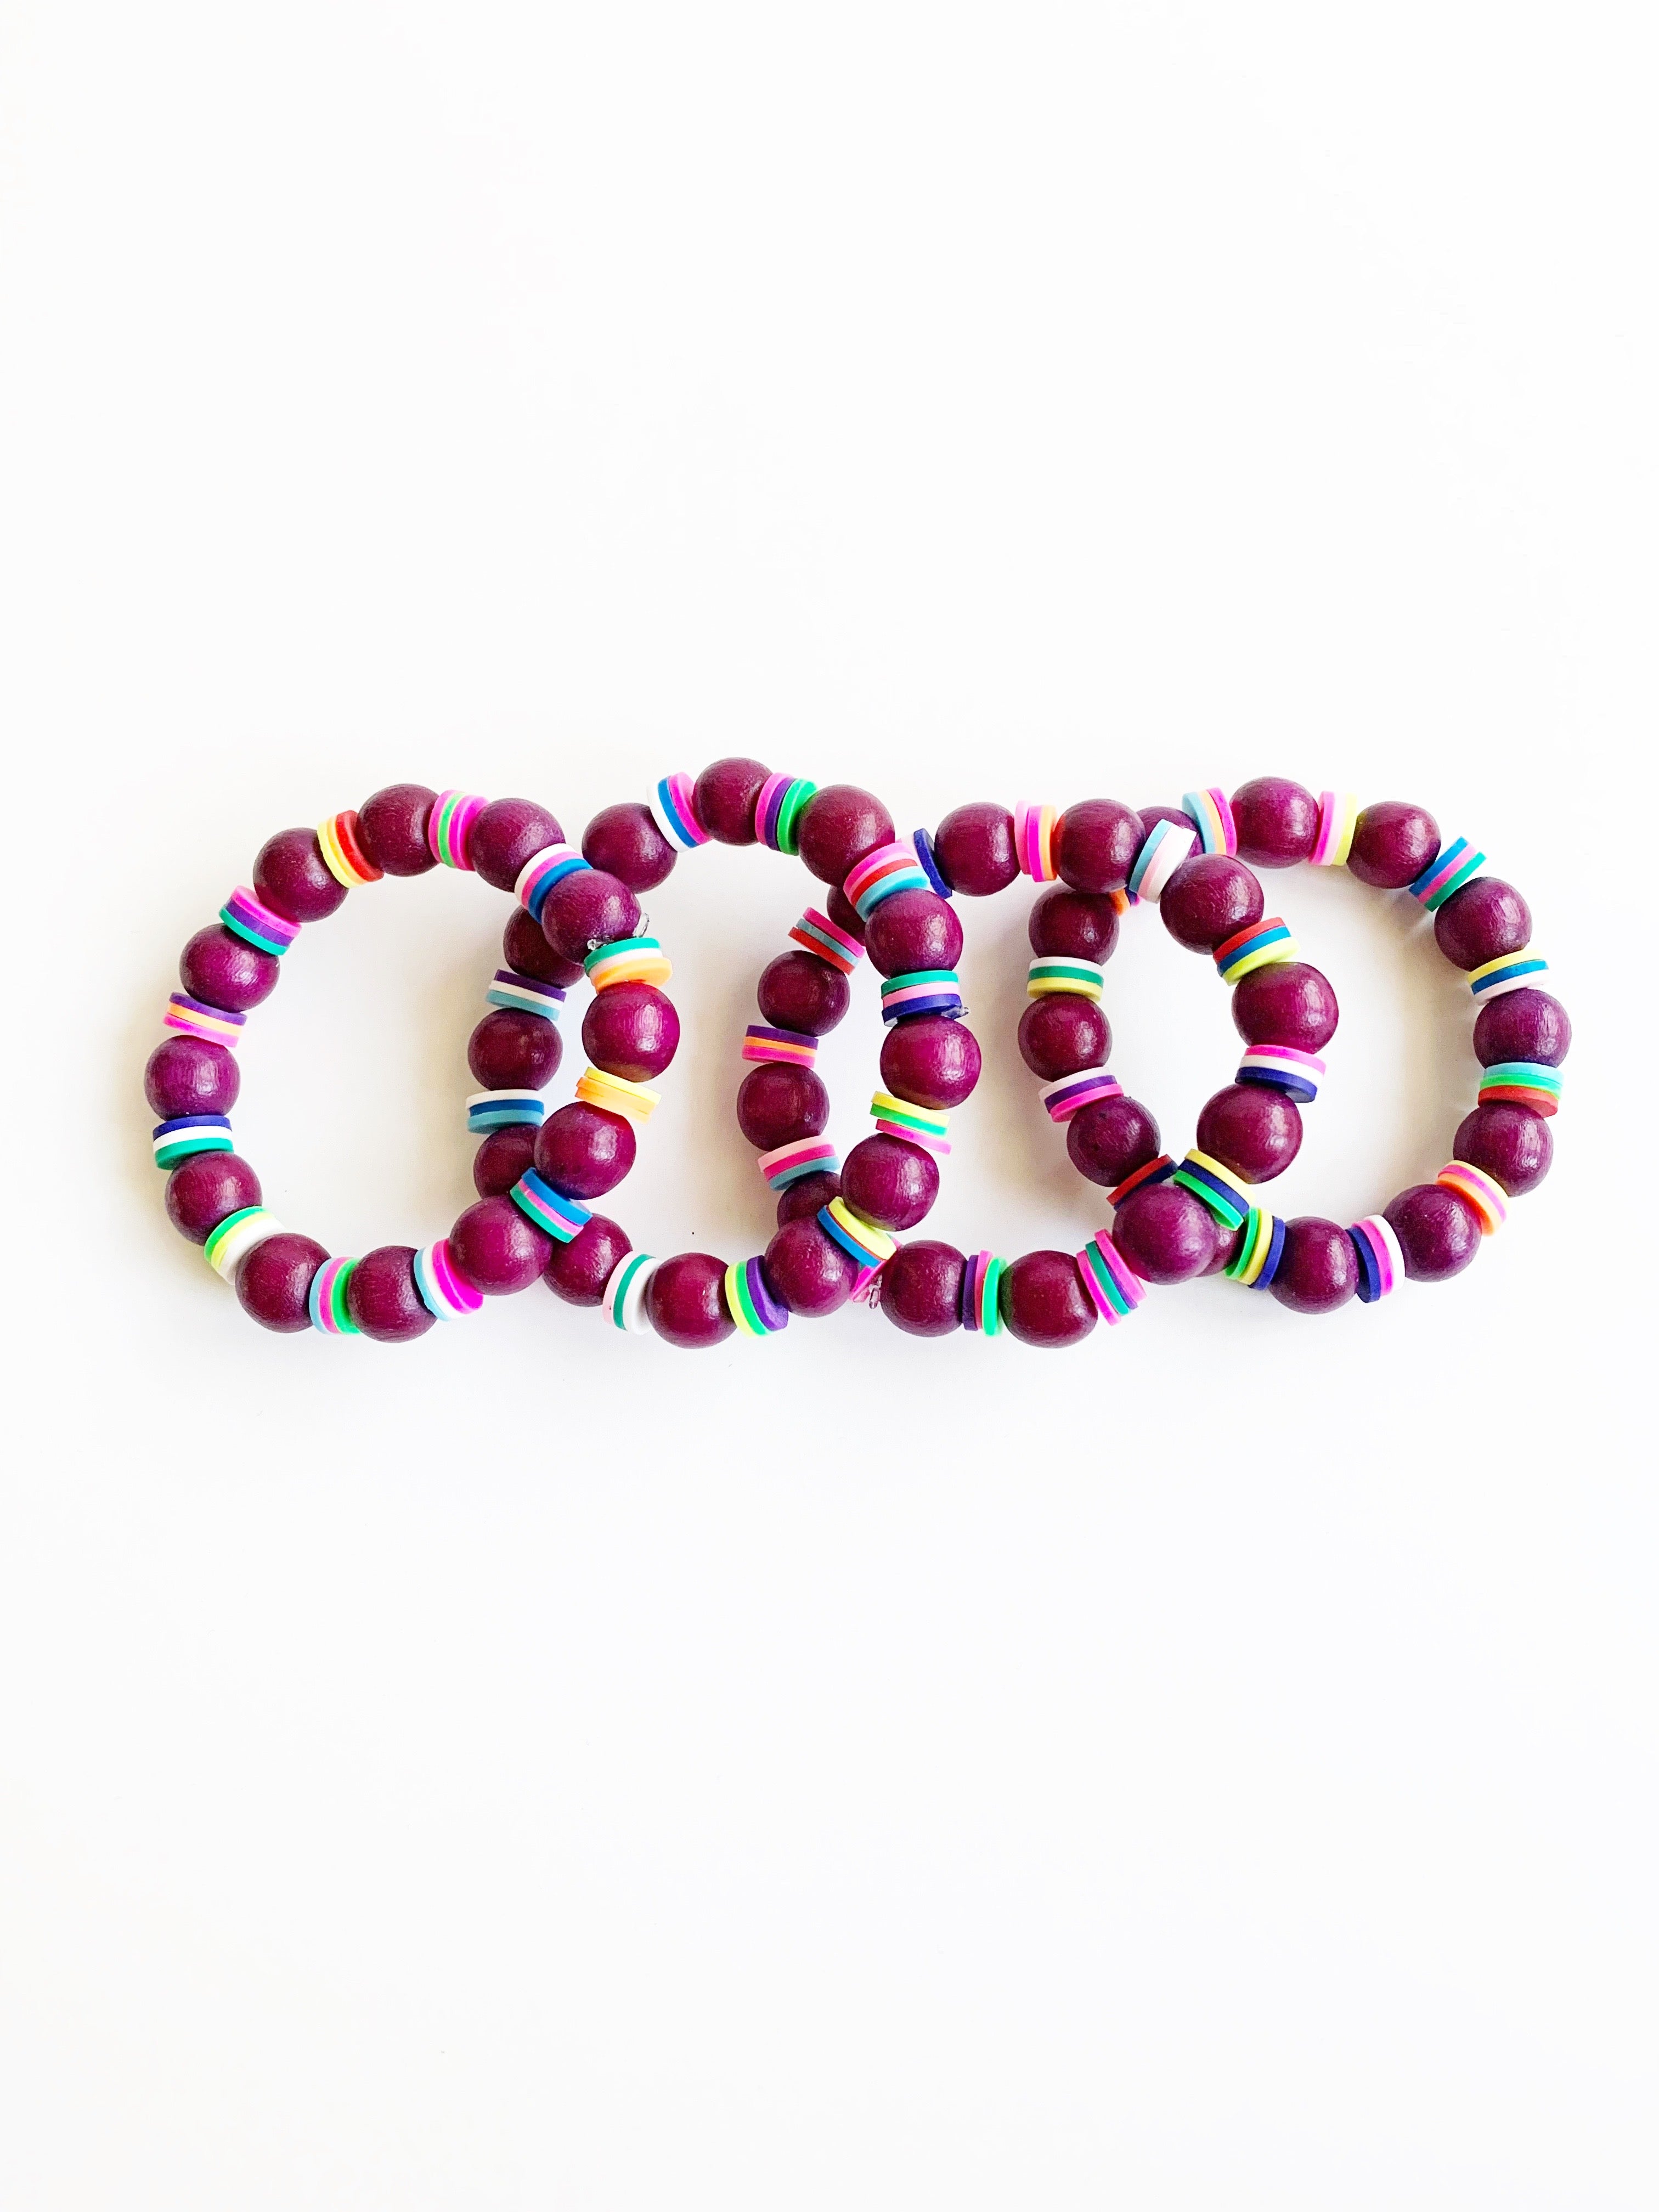 Four Child sized Plum and rainbow confetti beaded stretch bracelets overlaying each other.